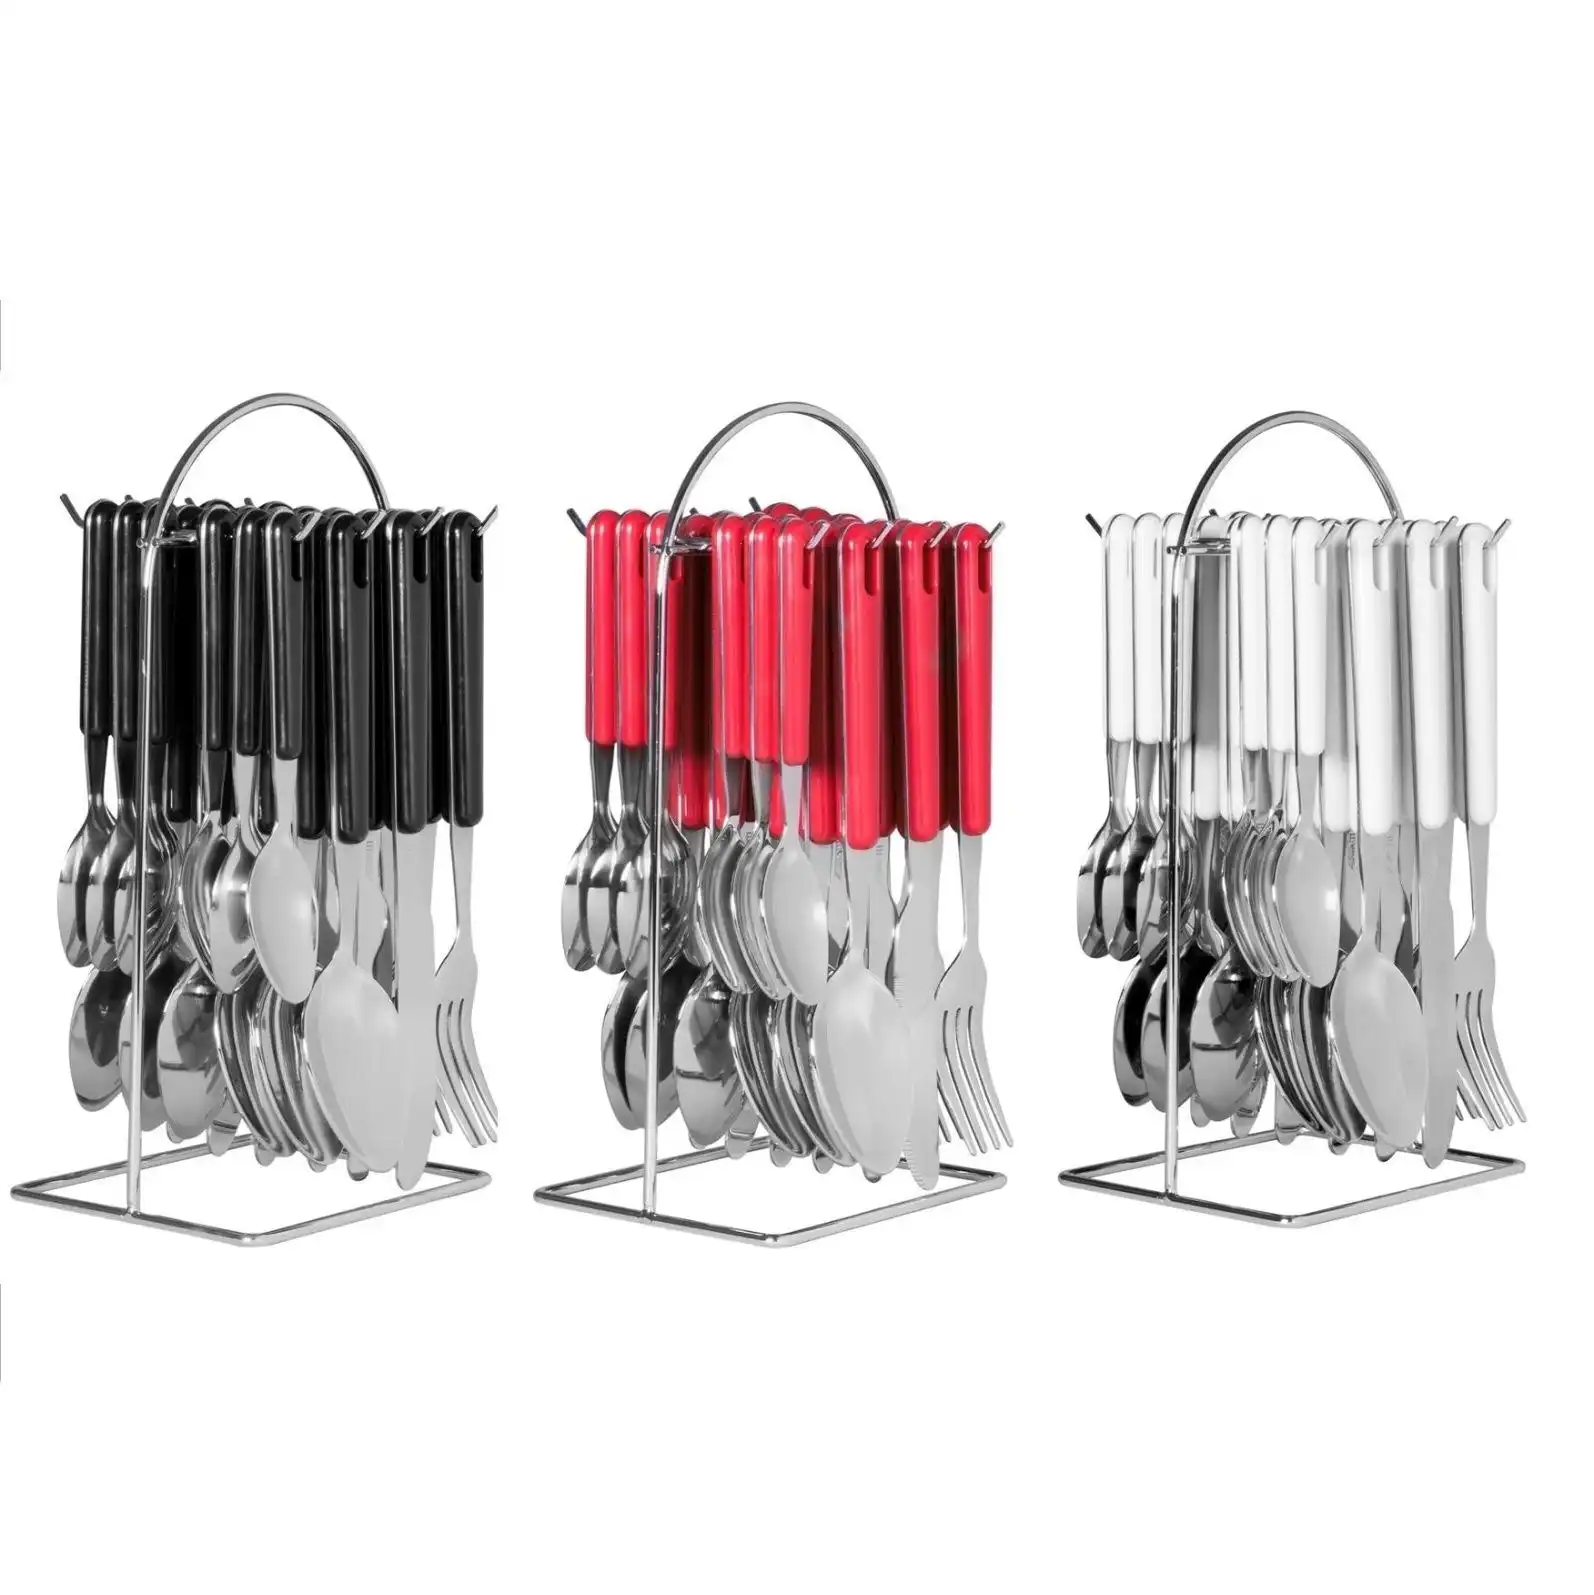 Avanti 24 Piece Hanging Cutlery Set   Red, Black Or White